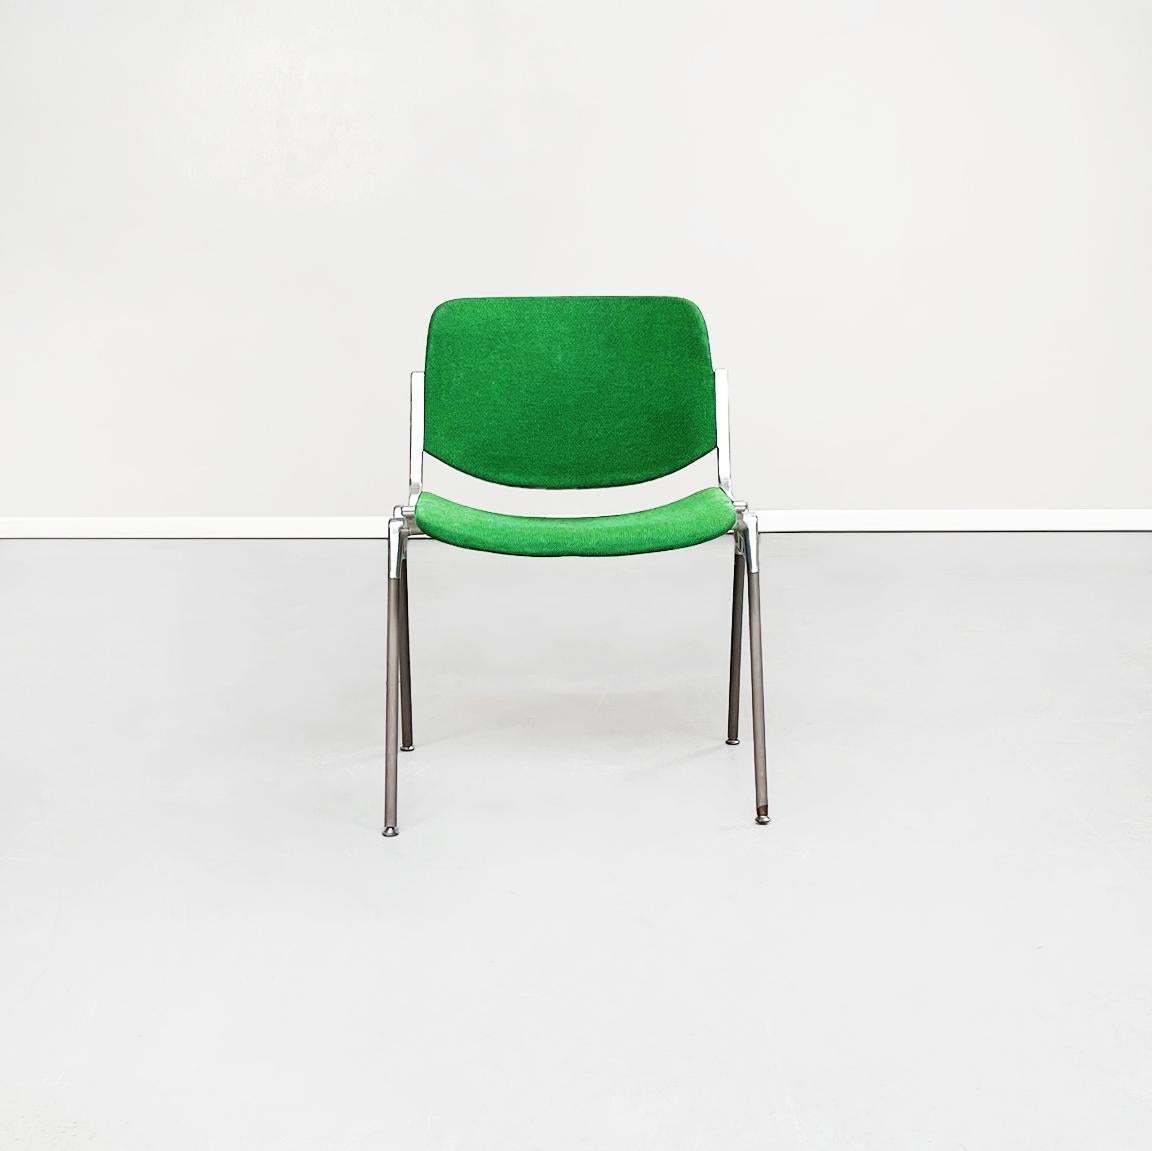 Italian mid-century Green fabric aluminum DSC chair by Piretti for Anonima Castelli, 1965
DSC model chair with rounded rectangular seat and back, upholstered in bright green fabric. The sturdy structure is in aluminum with round section legs